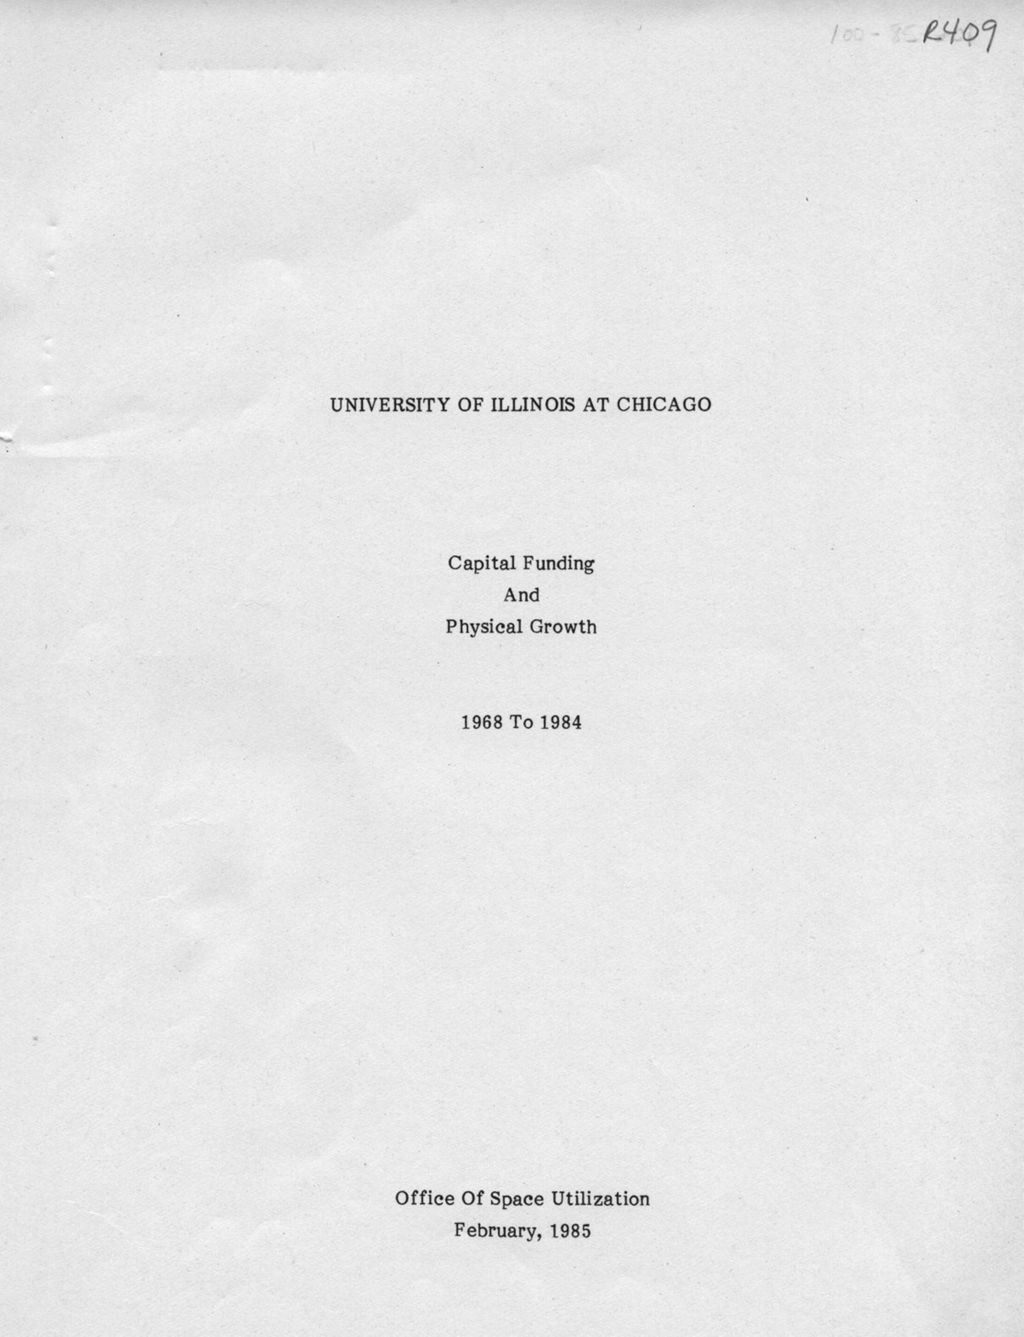 University of Illinois at Chicago, Capital Funding and Physical Growth, 1968 To 1984